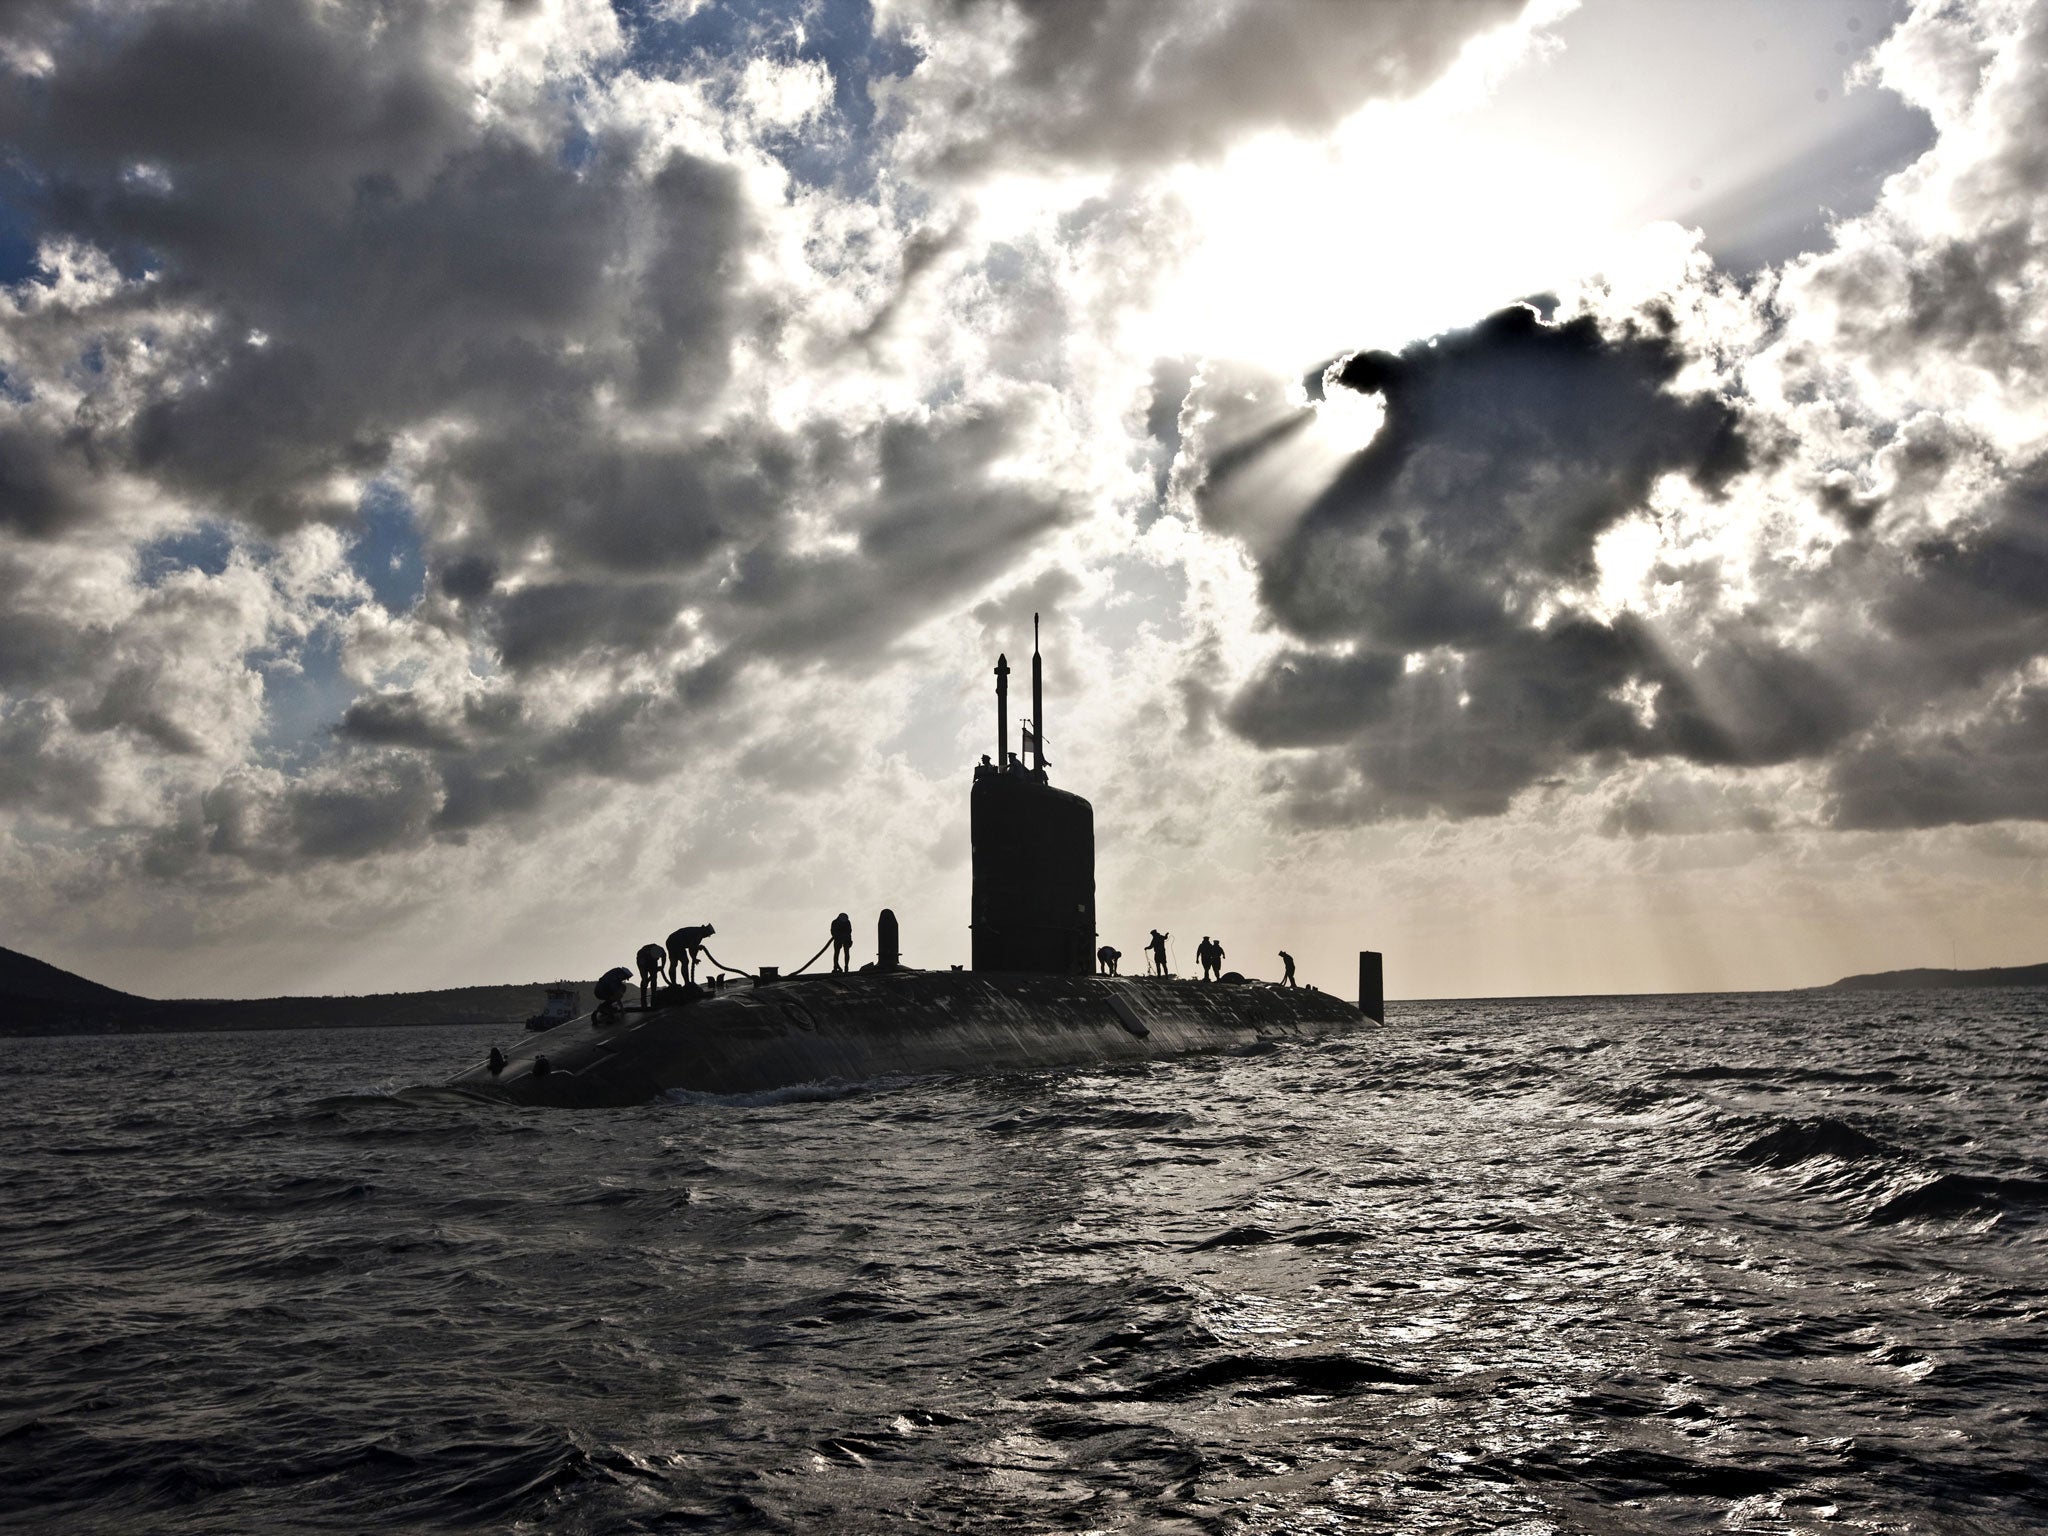 Surface tension: ‘Talent’ nuclear submarine, in 2010